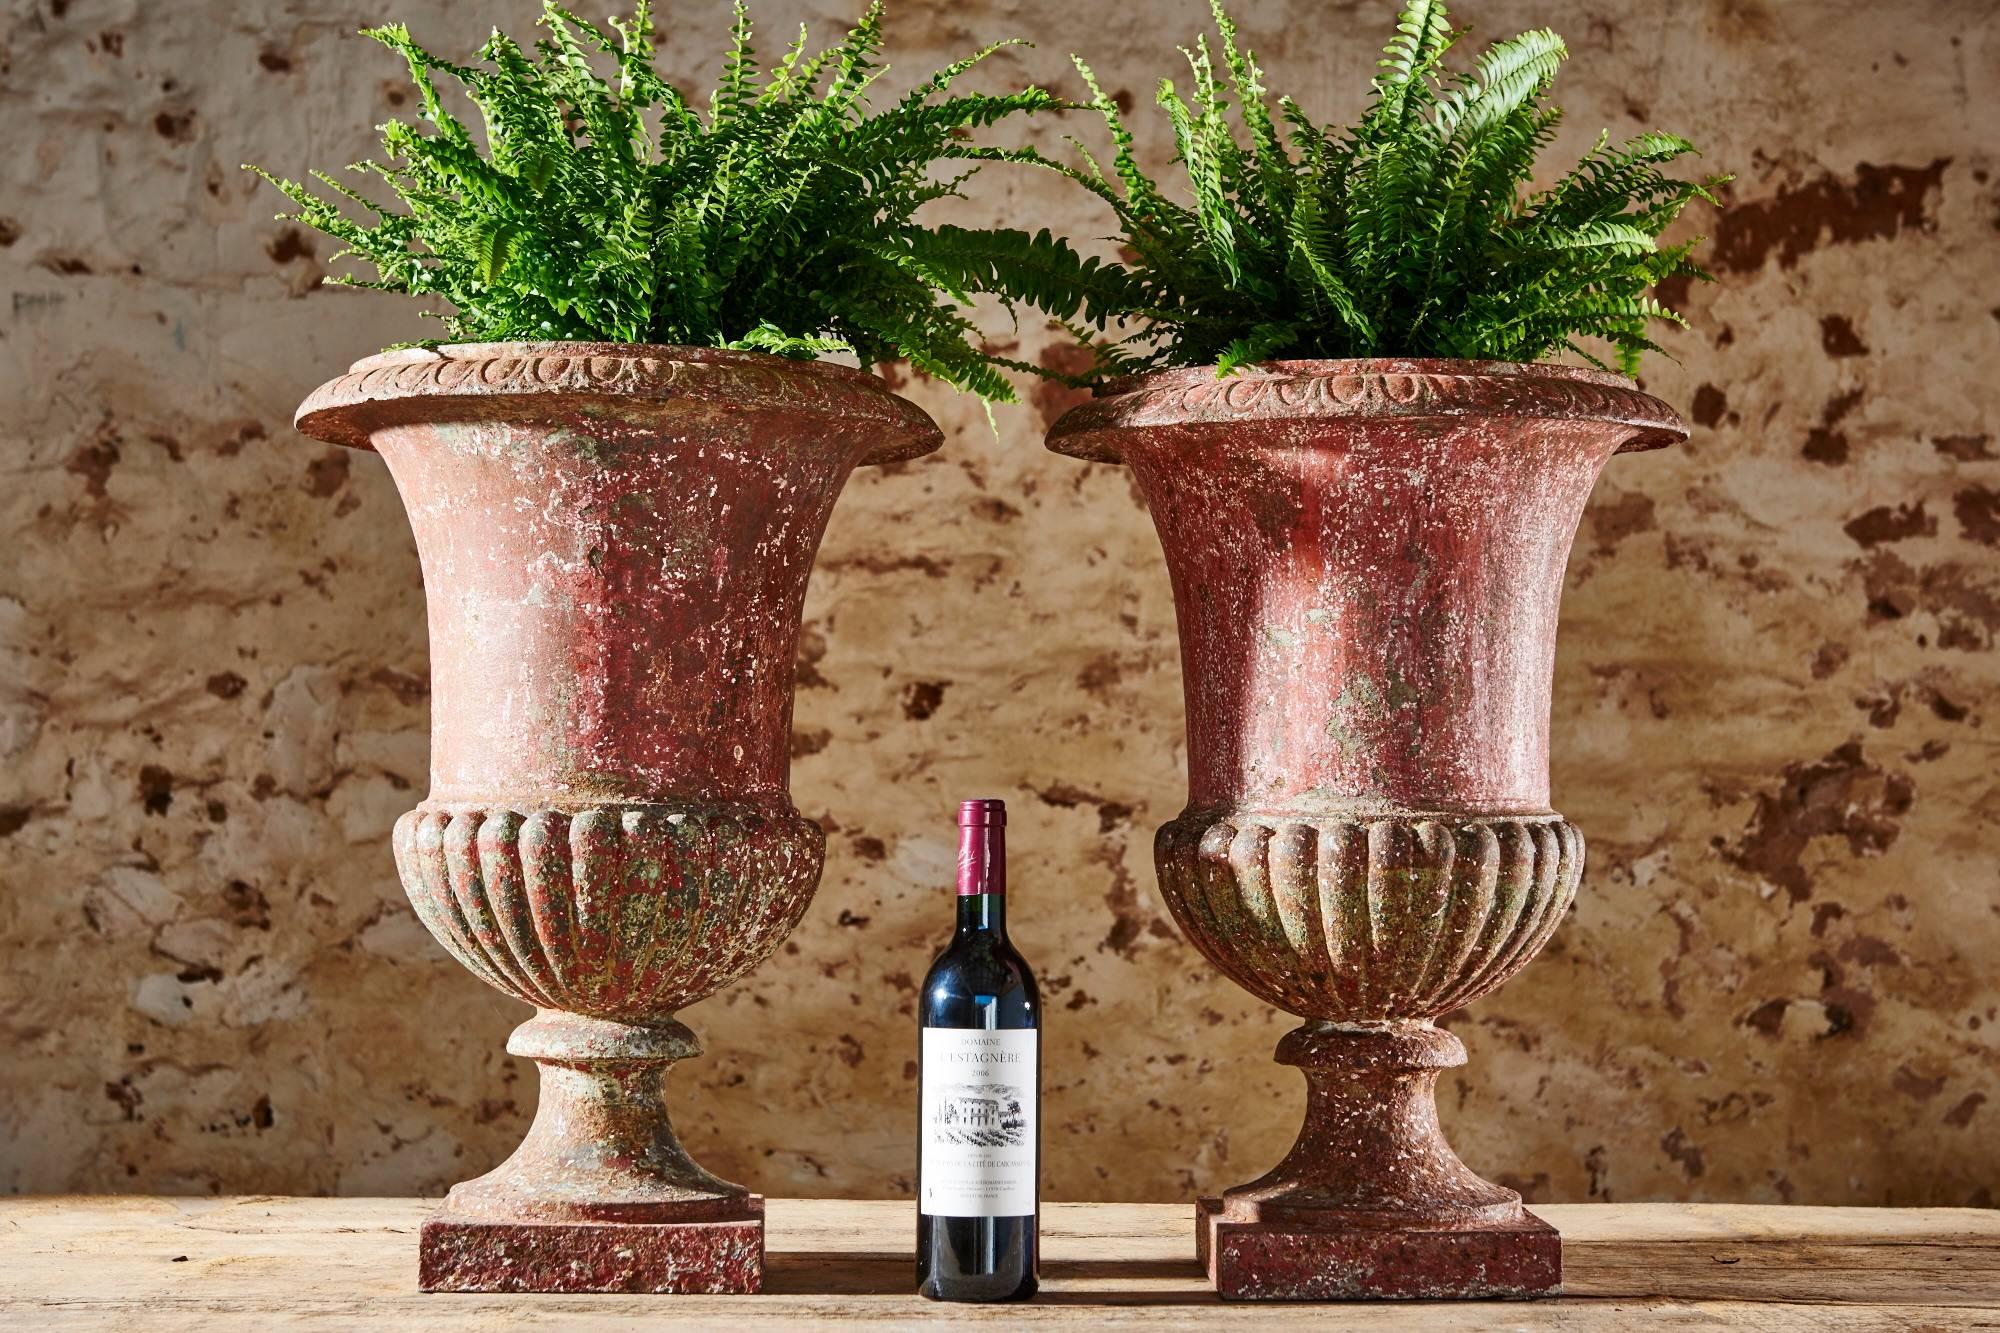 A pair of 19th century Medici urns with a beautiful red patina. We love both the style and finish of these elegant urns.

Each has a plain rim and body, with a fluted rim sitting on a square base The urns were originally painted in white and